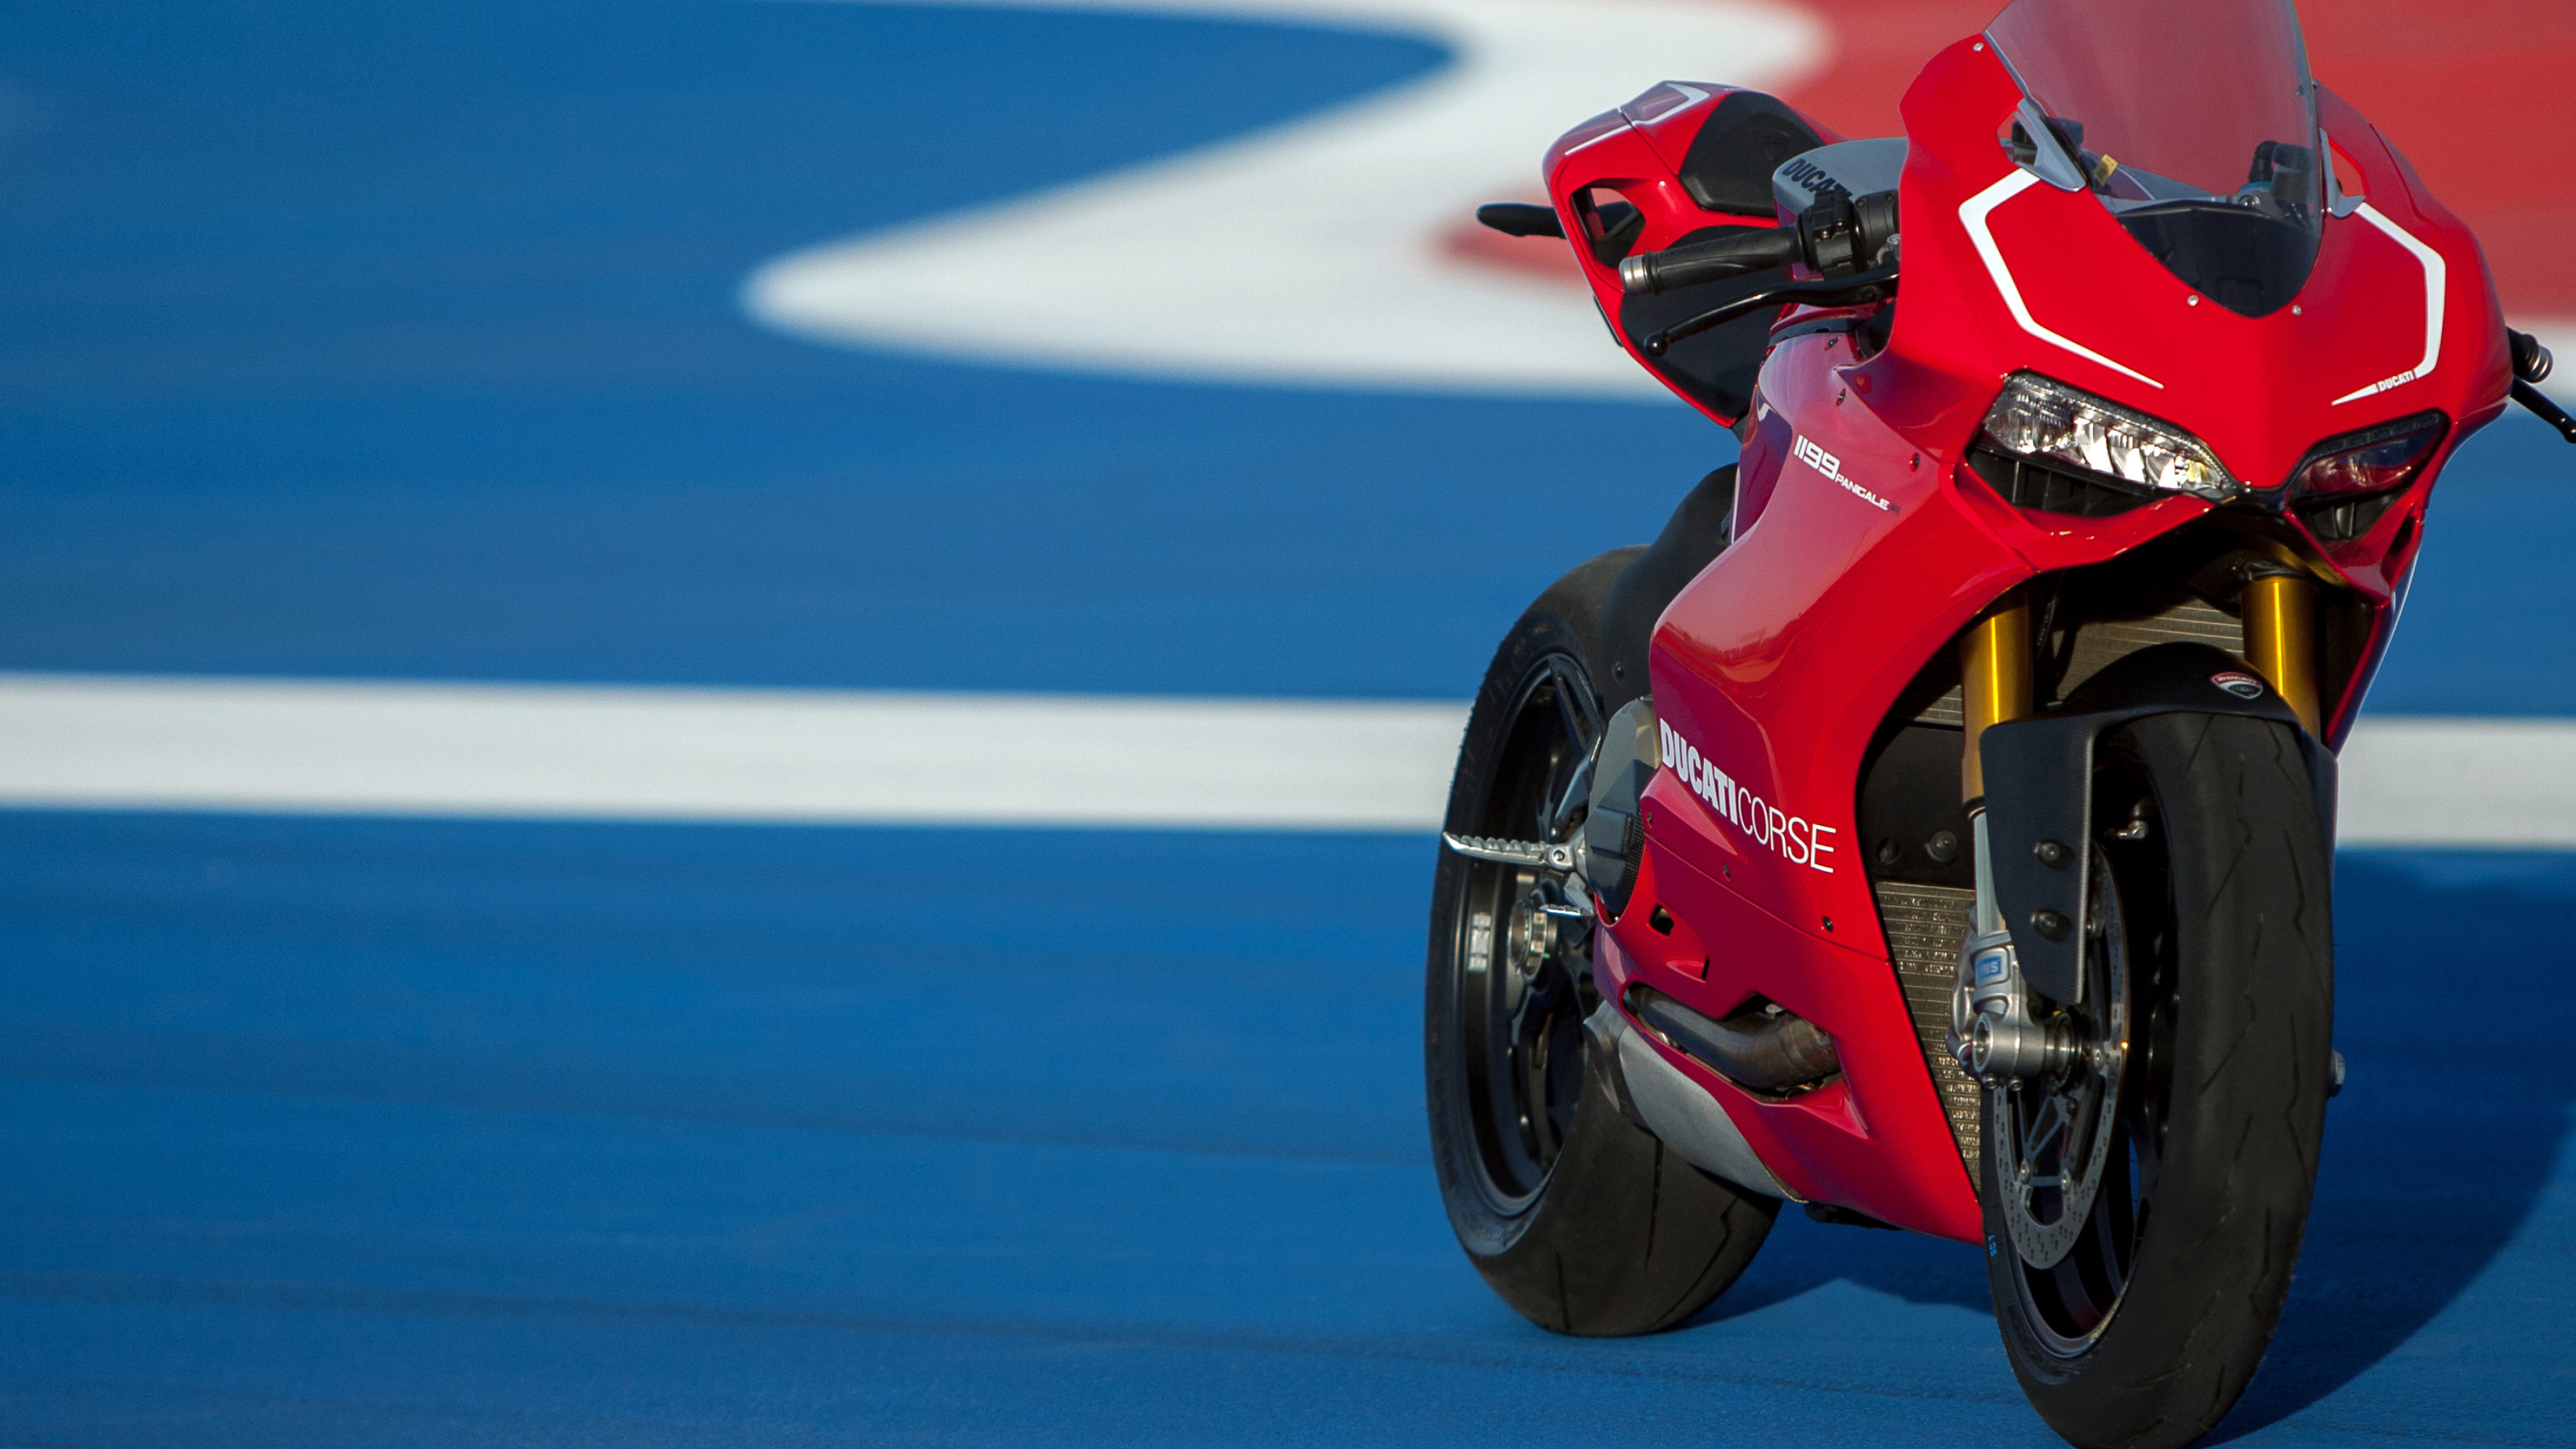 Superbike: The Ducati Corse racing team's Ducati 1199 Panigale sports motorcycle. 3840x2160 4K Wallpaper.